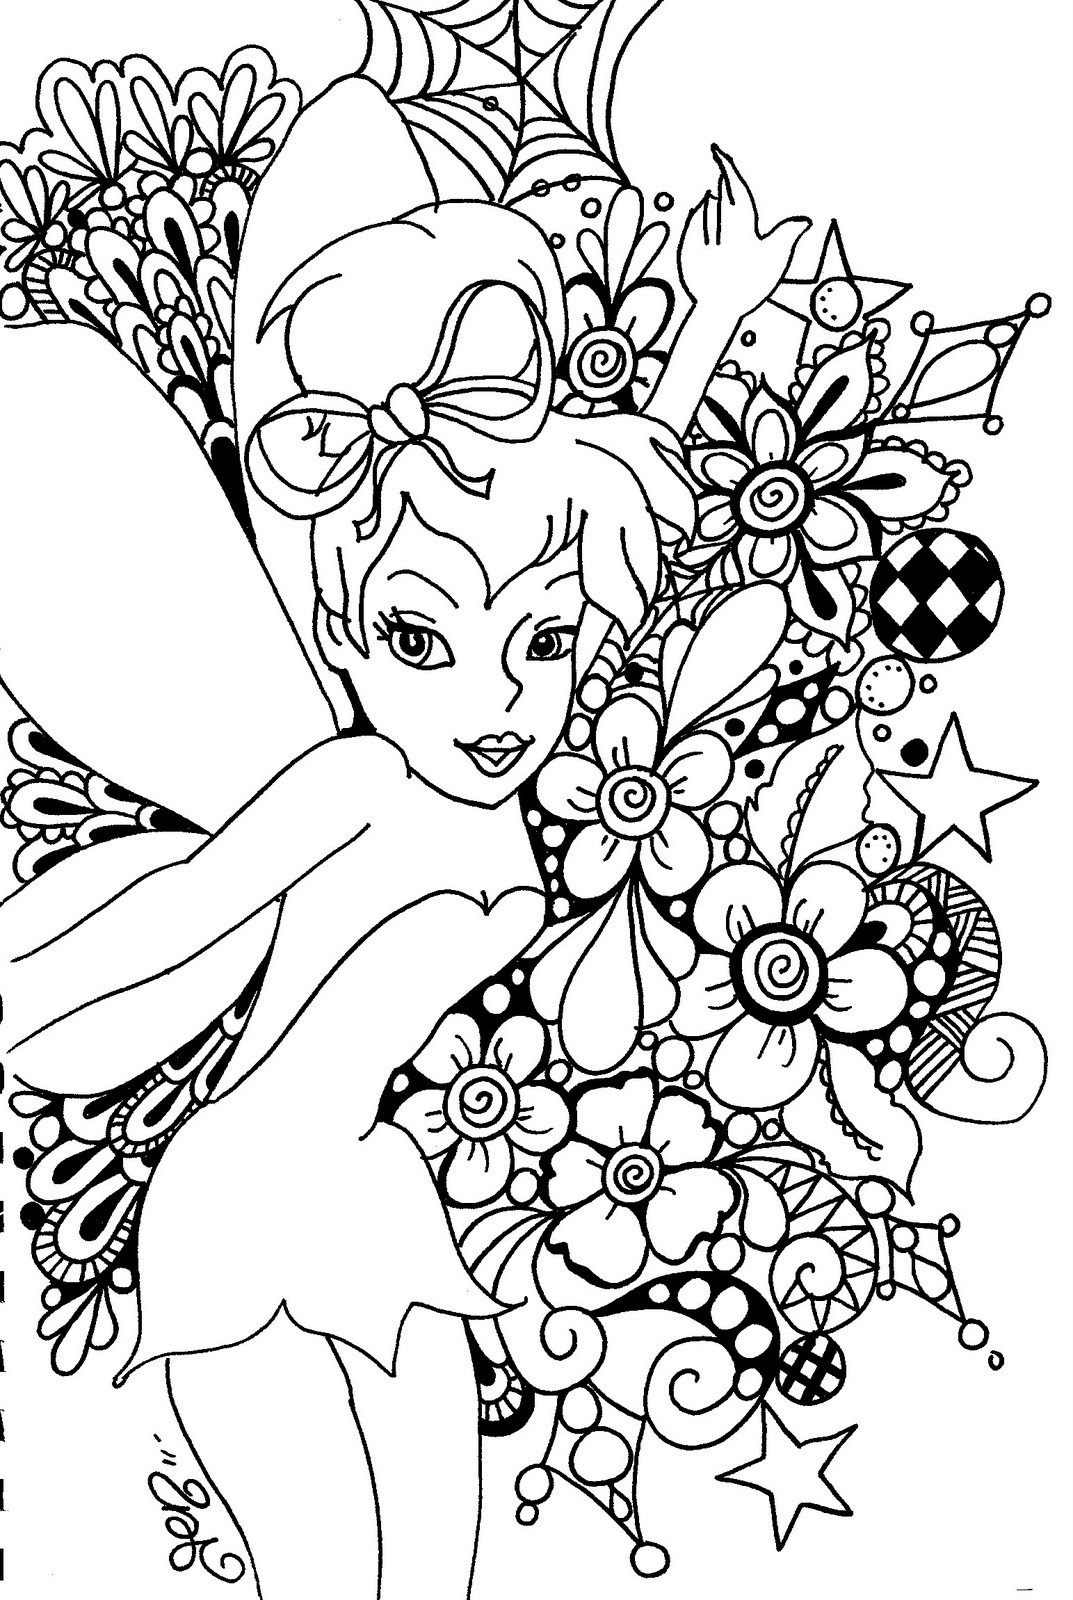 Printable Fairy Coloring Pages
 FAIRY COLORING PAGES